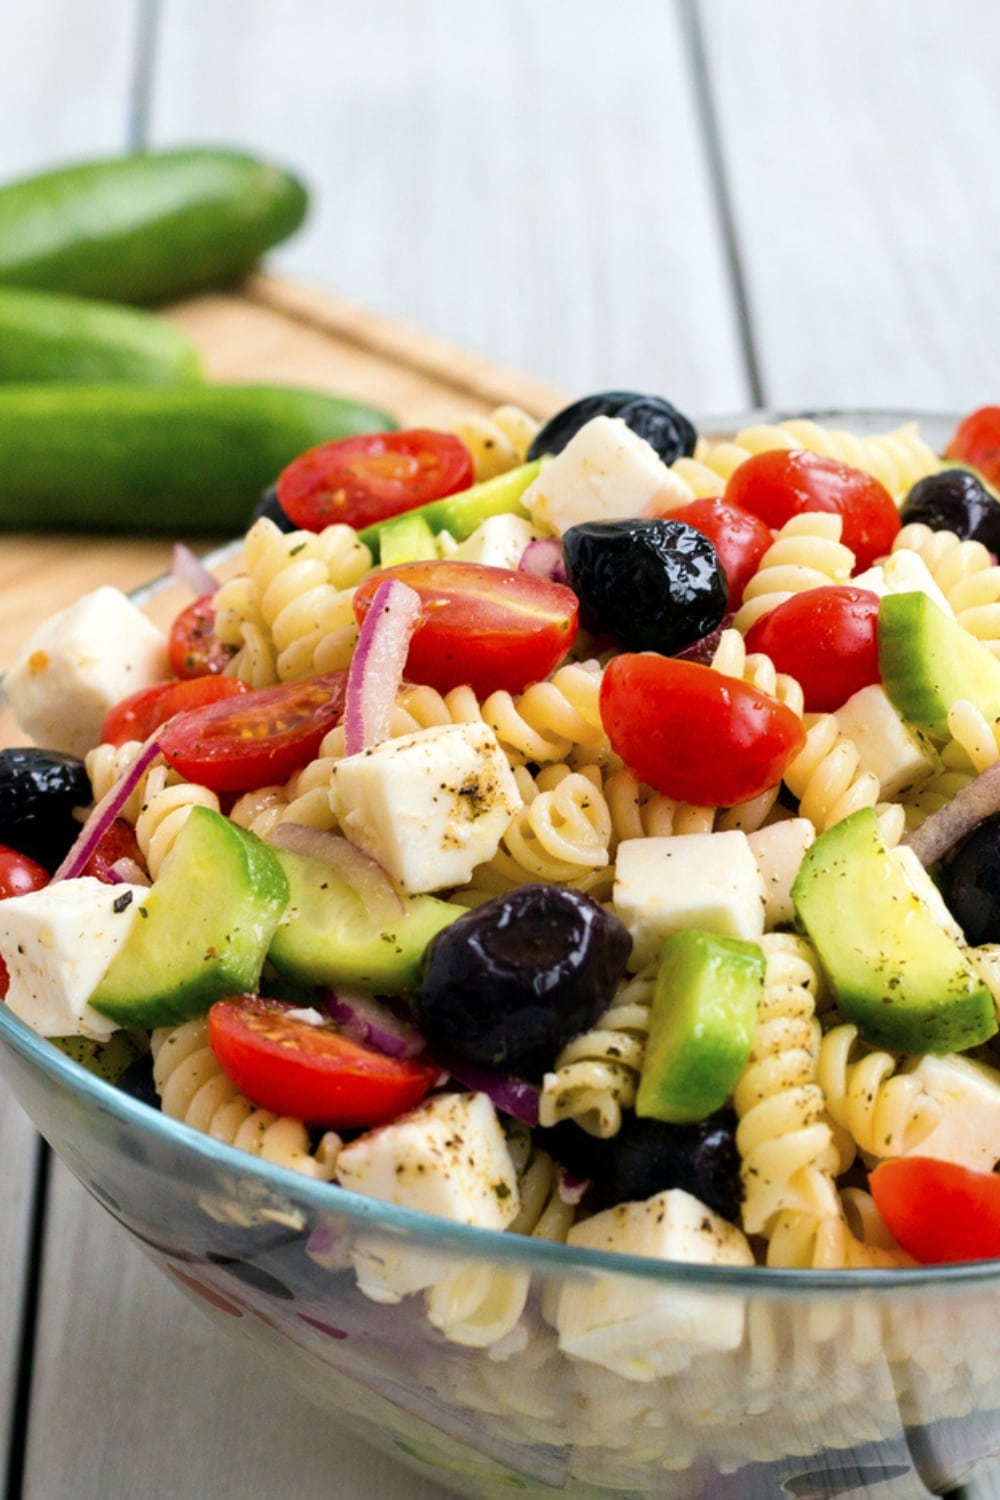 Greek Pasta Salad with Vegetables, Cheese and Creamy Dressing